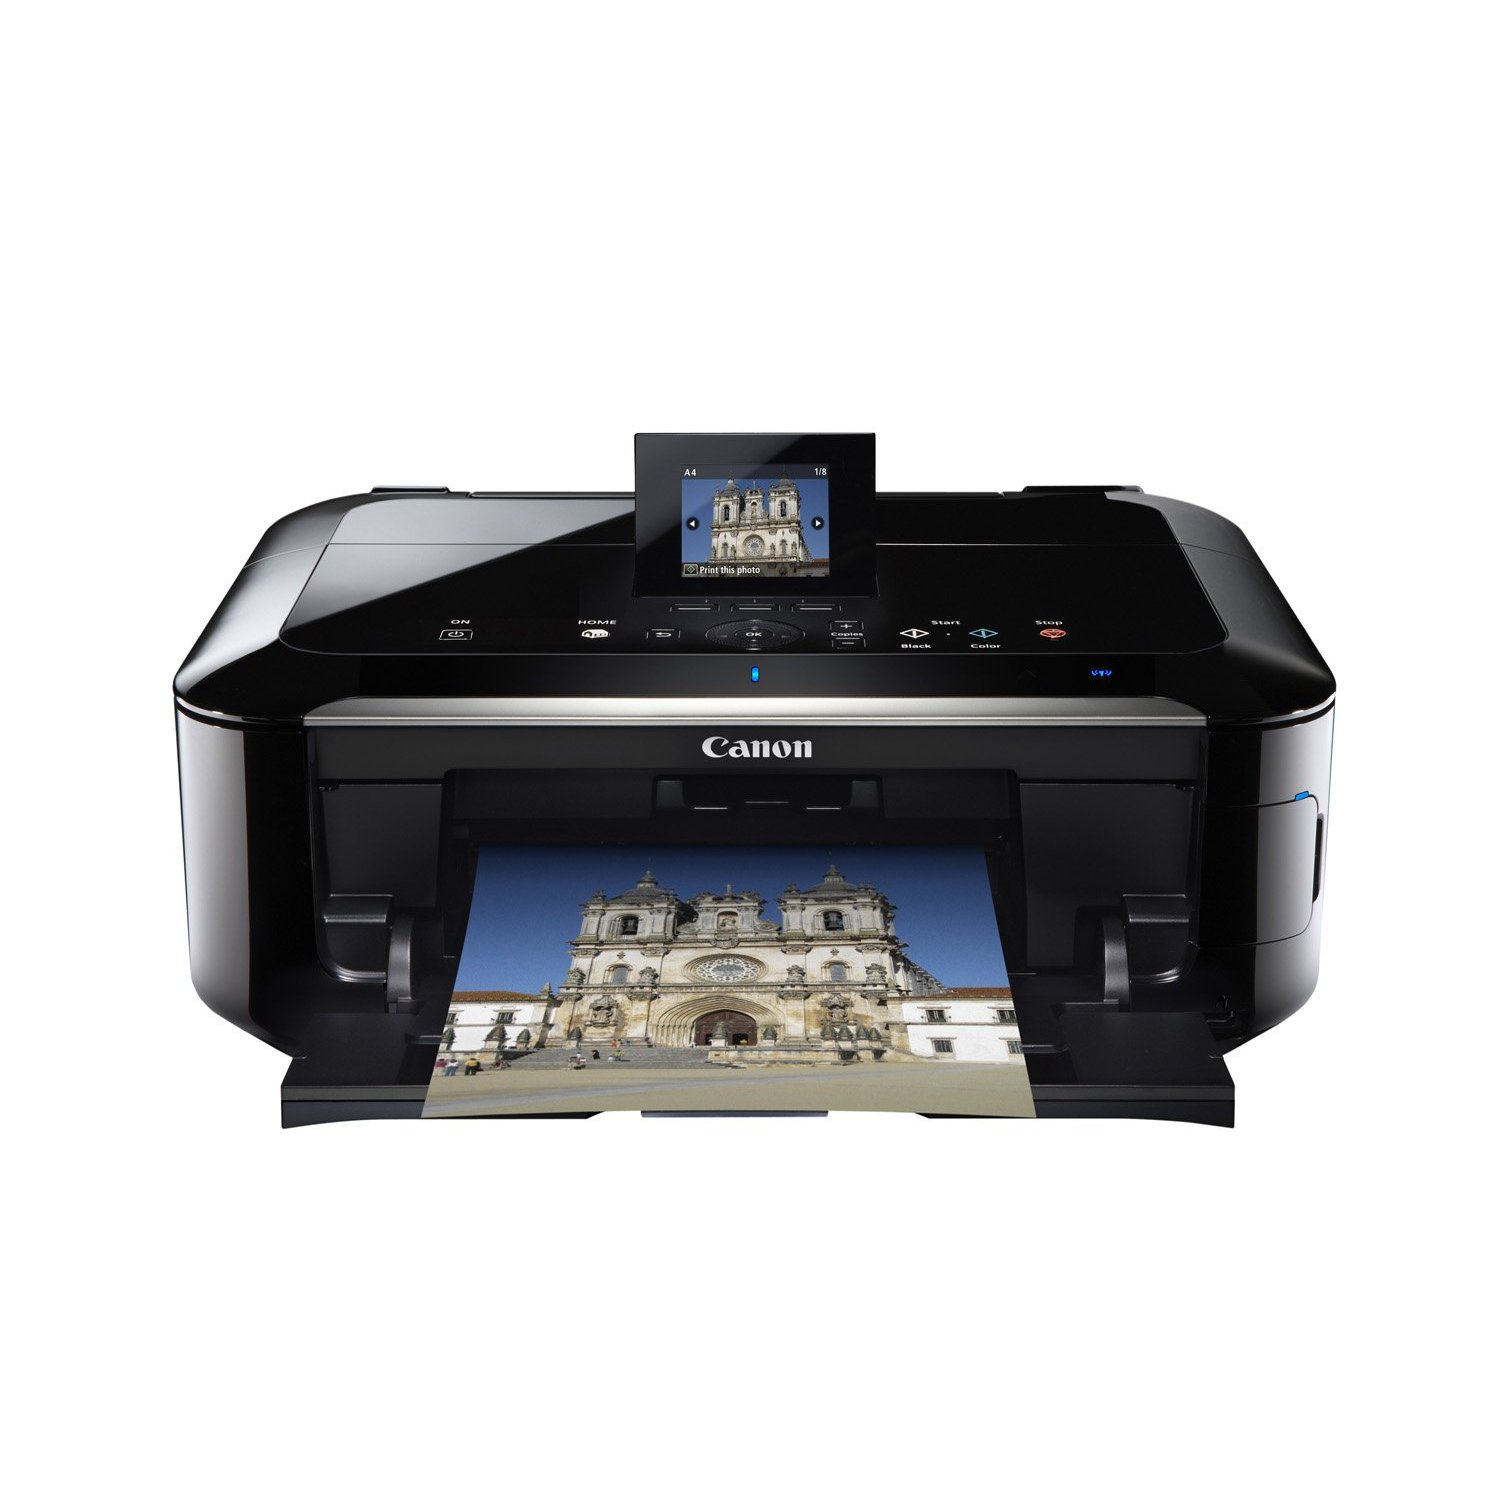 http://thetechjournal.com/wp-content/uploads/images/1109/1316592372-canon-pixmas-new-three-wireless-printers-with-airprint-support-4.jpg